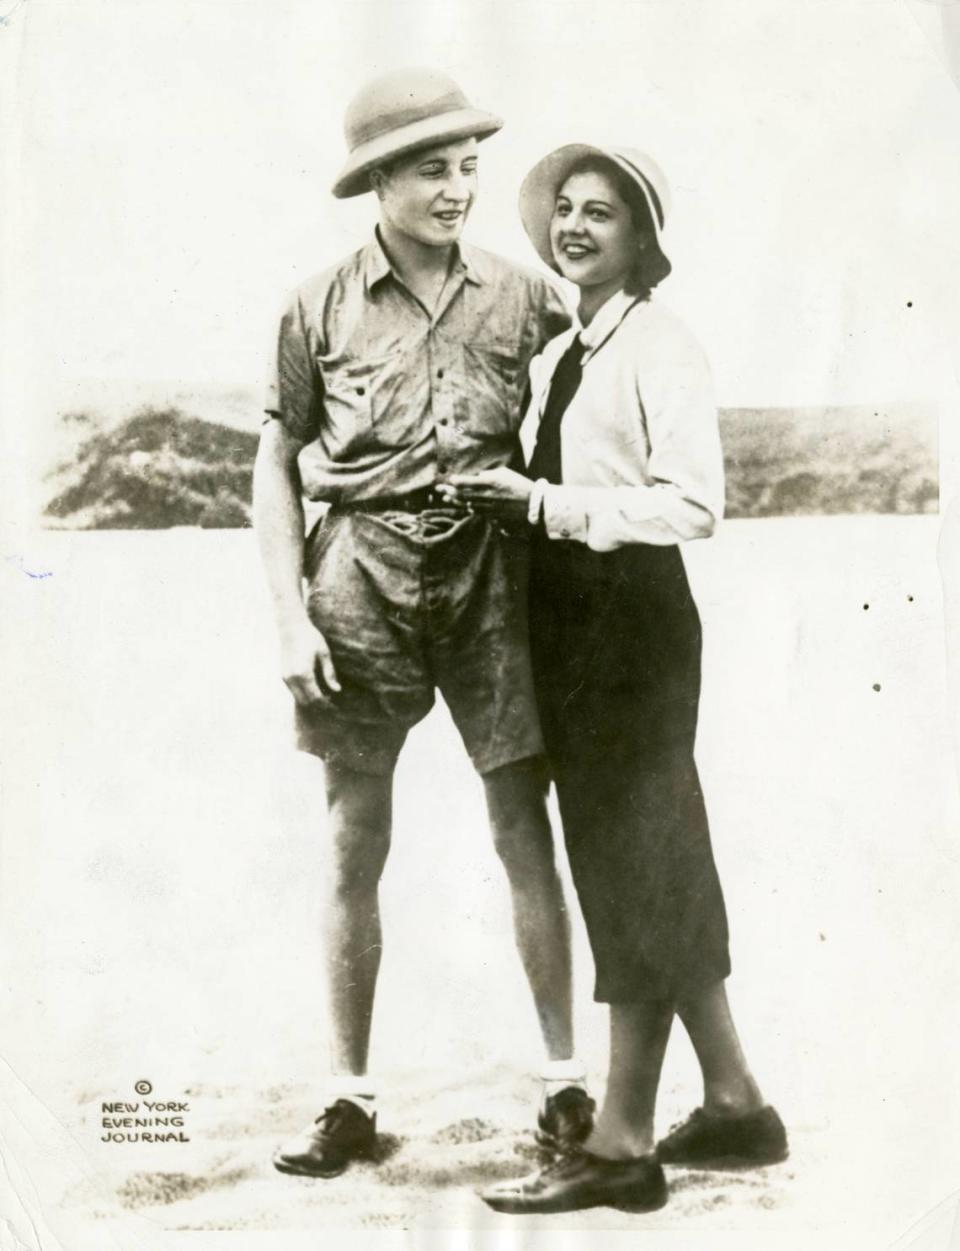 Z. Smith Reynolds, the youngest son of tobacco magnate R.J.  Reynolds, divorced his first wife and married torch singer and Broadway starlet Libby Holman in 1931. After a delayed globetrotting honeymoon, they went to Reynolda, the Reynolds family country estate, to spend the summer of 1932. They had been married seven months when Reynolds was shot and died.